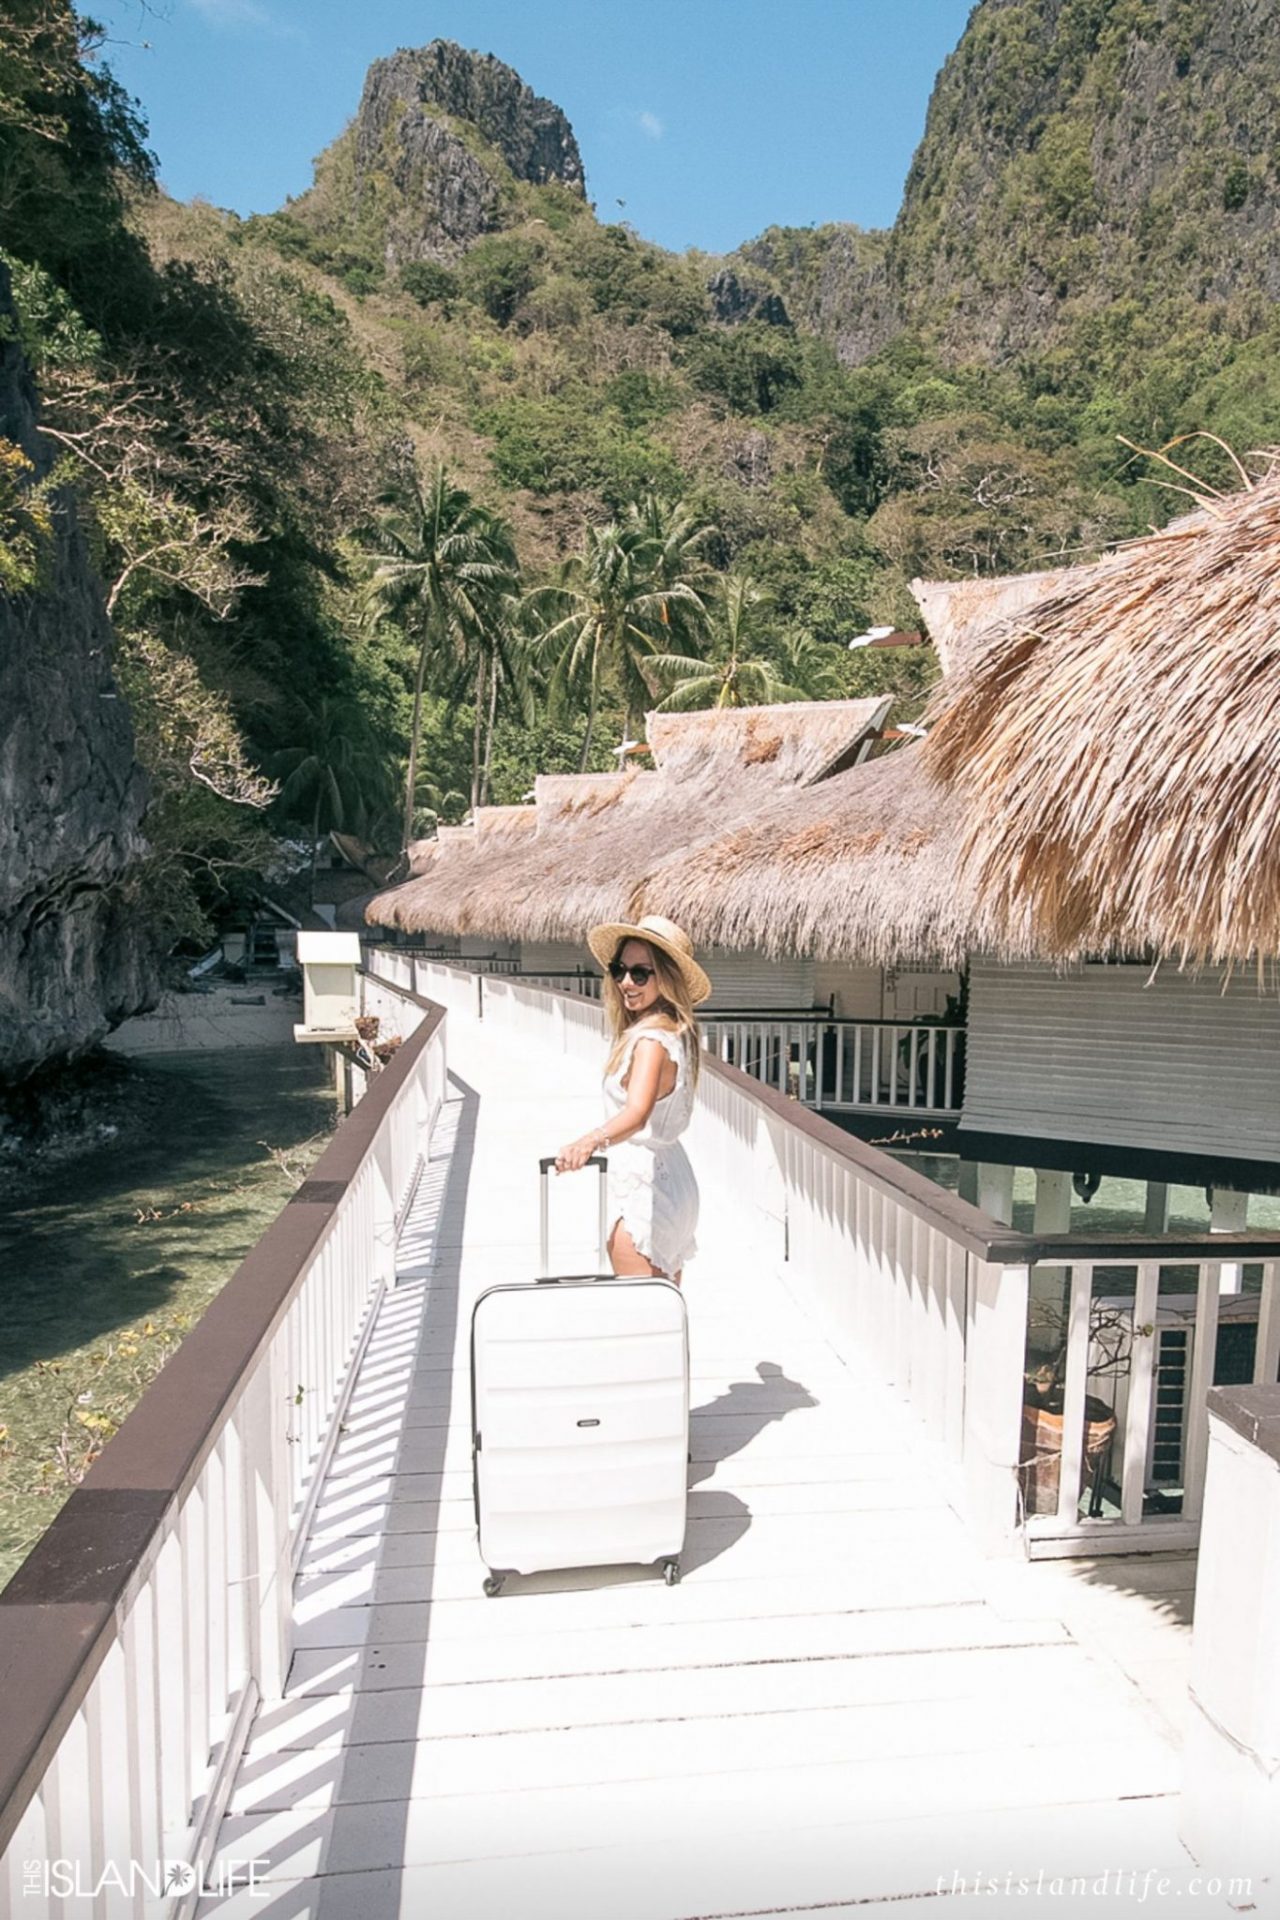 This Island Life | On tour and at home with American Tourister luggage